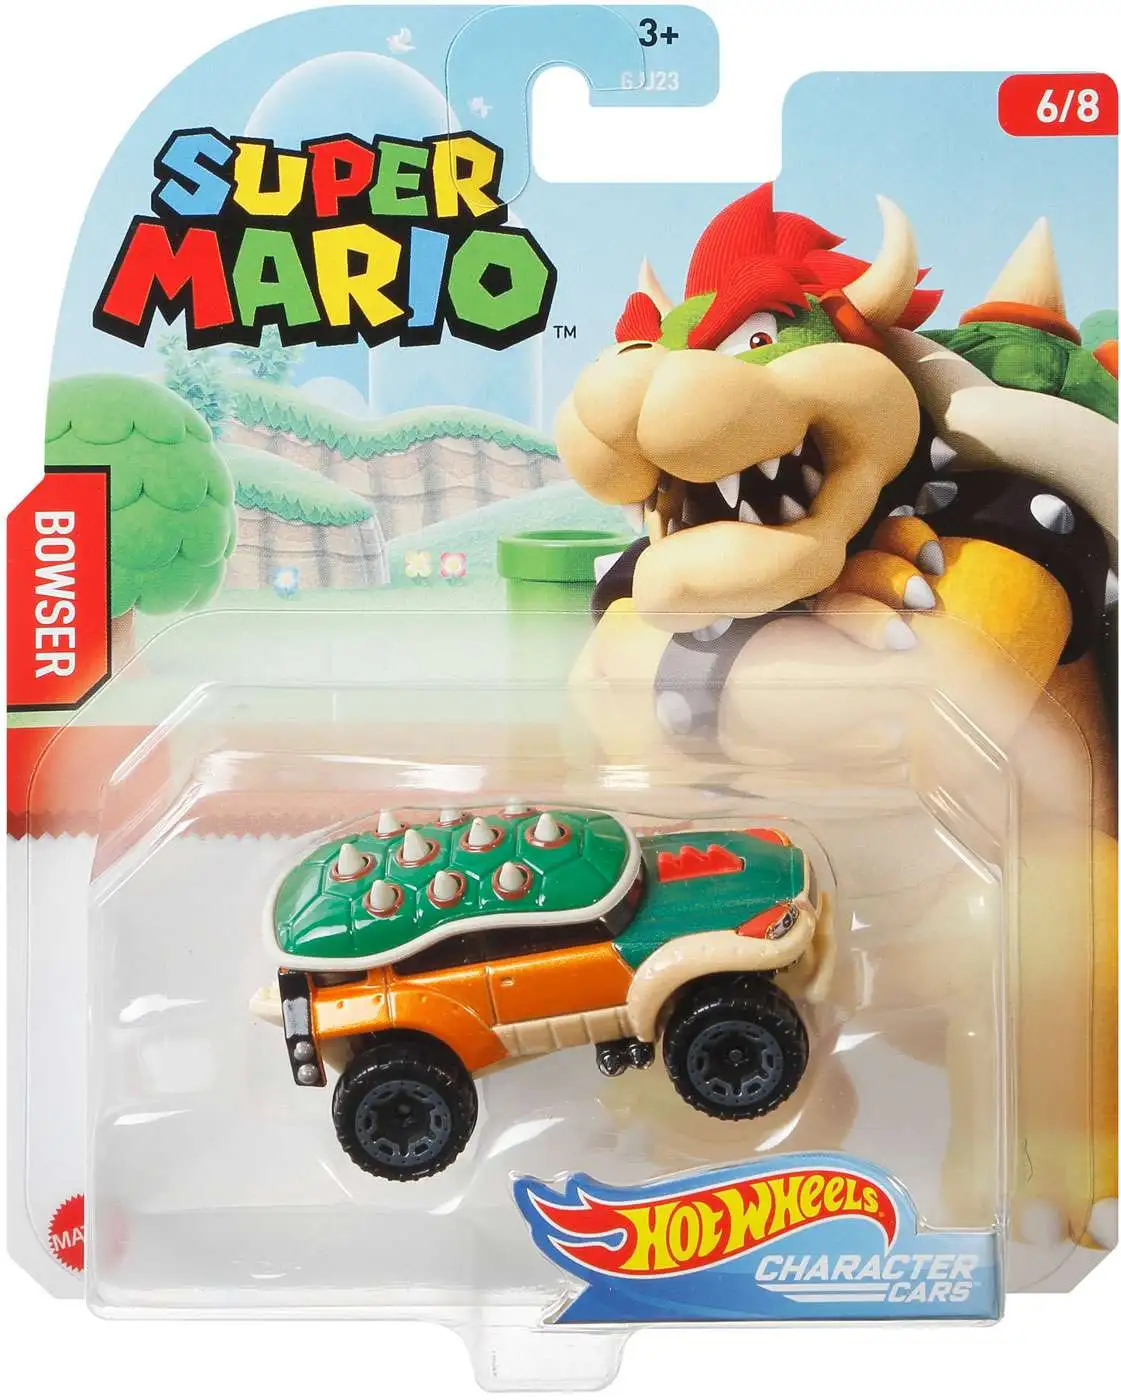 Complete Set of 8 Cars Super Mario Diecast_Hot_Wheels Character Cars 